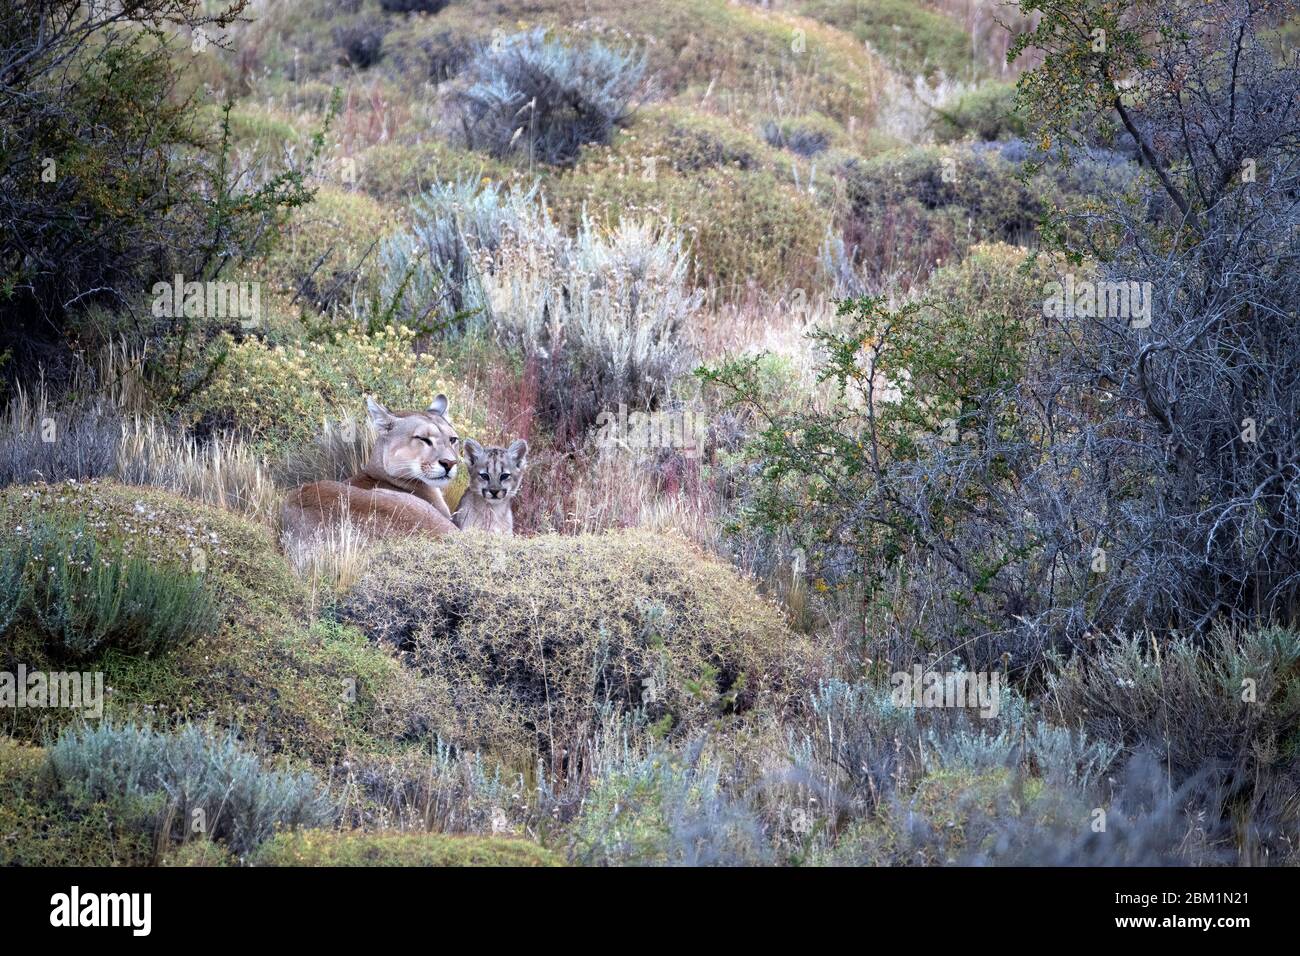 Puma mother and single cub, also known as a cougar or mountain lion, resting and watching from the grass and bushes on a hillside. Stock Photo